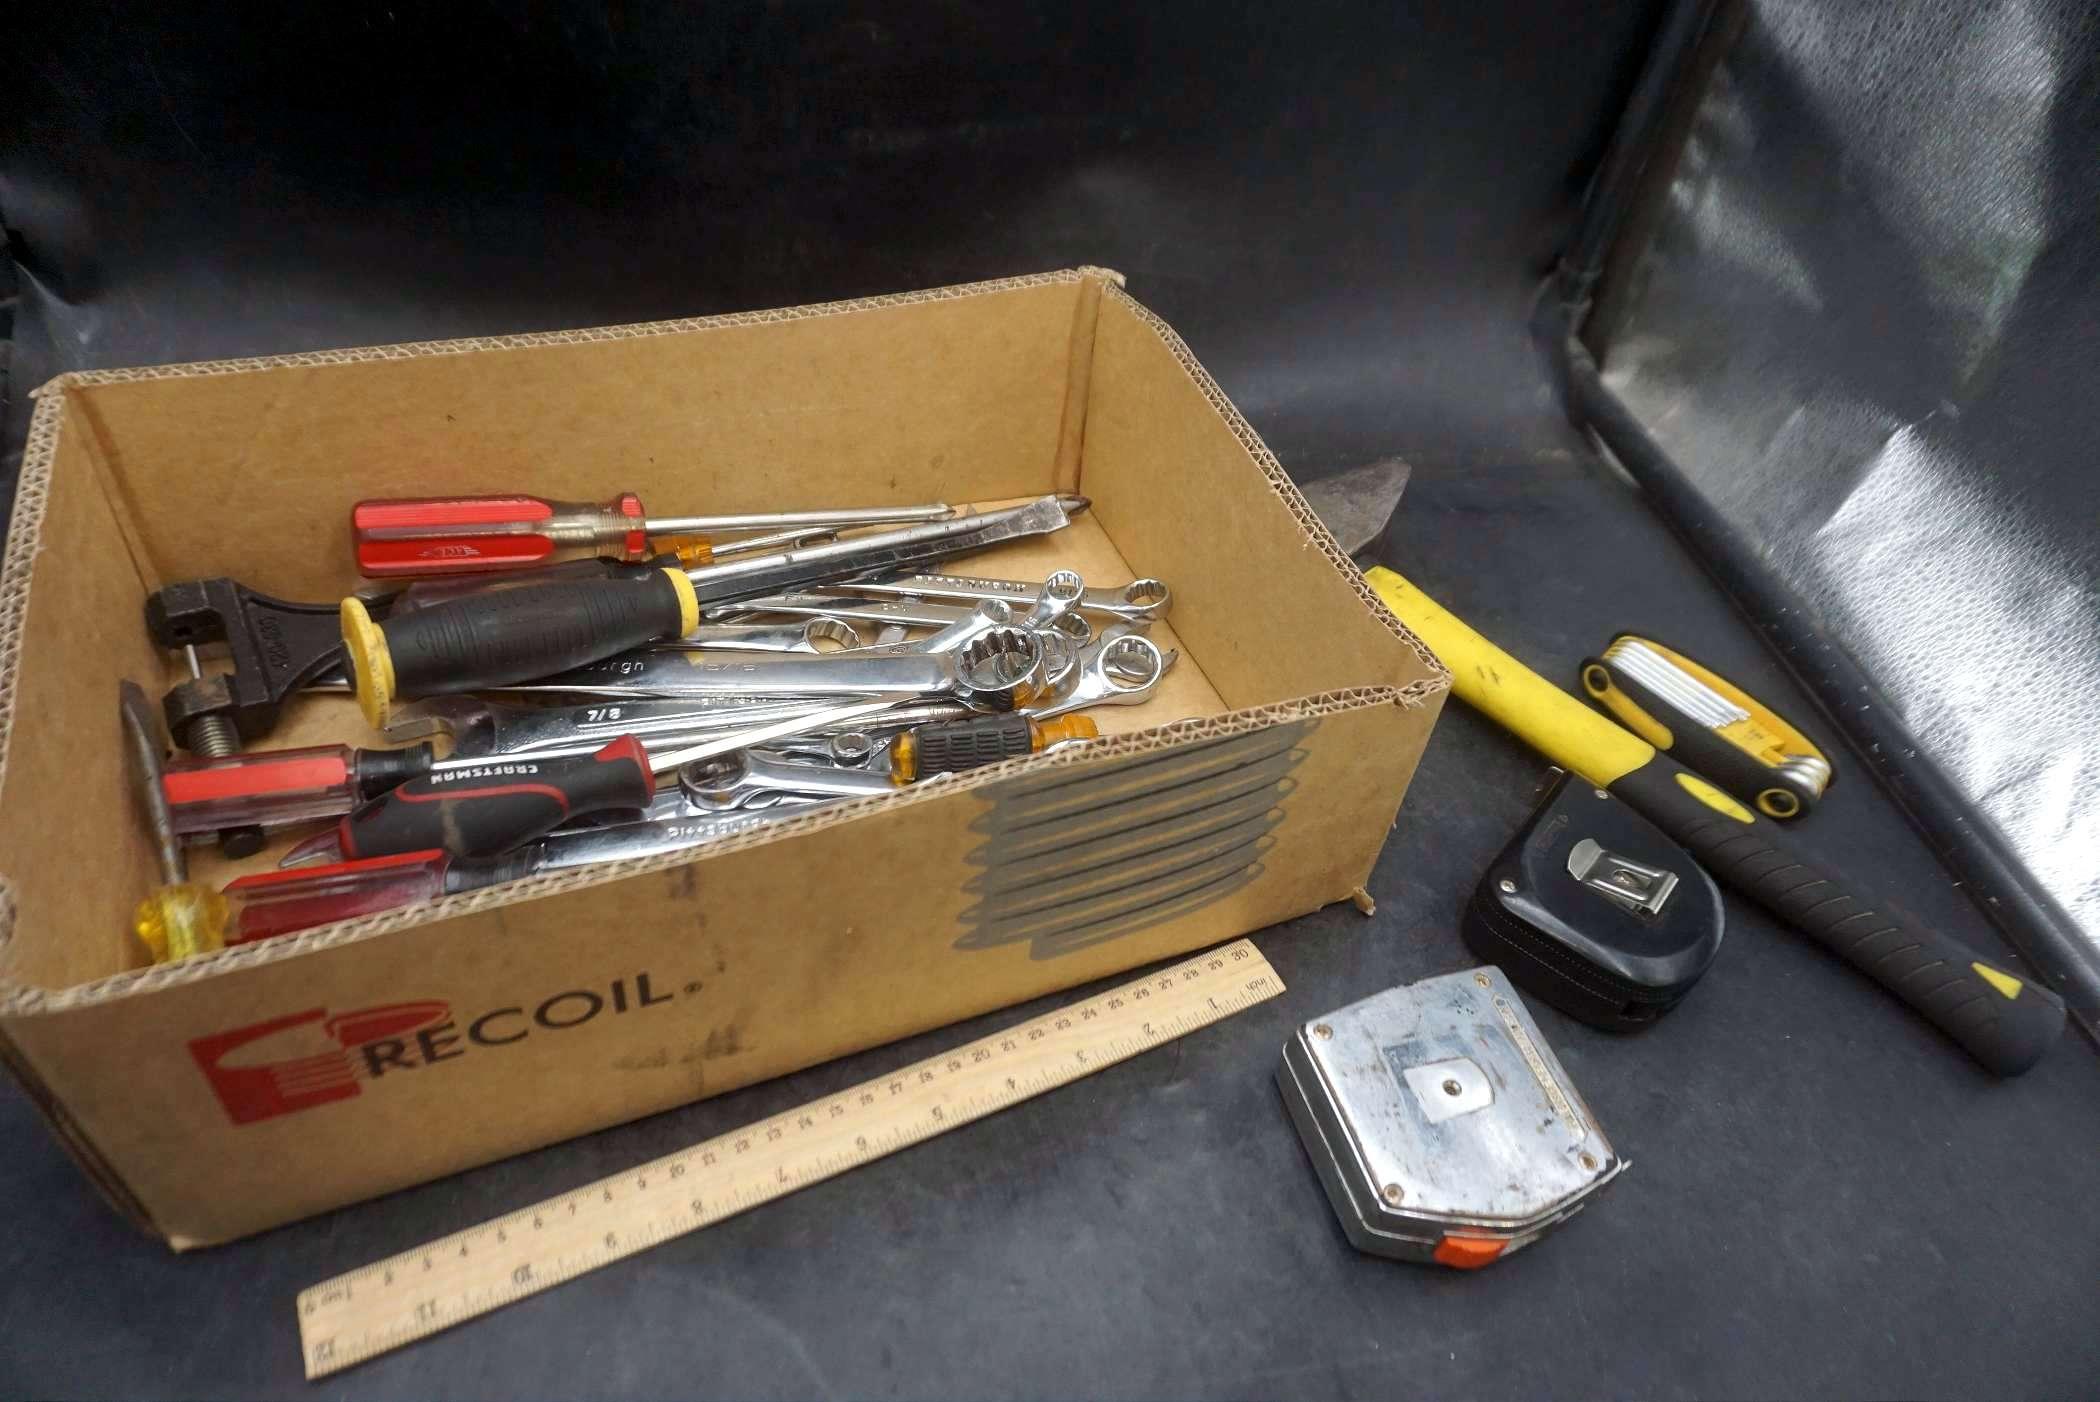 Hammer, Wrenches, Screwdrivers, Tape Measures